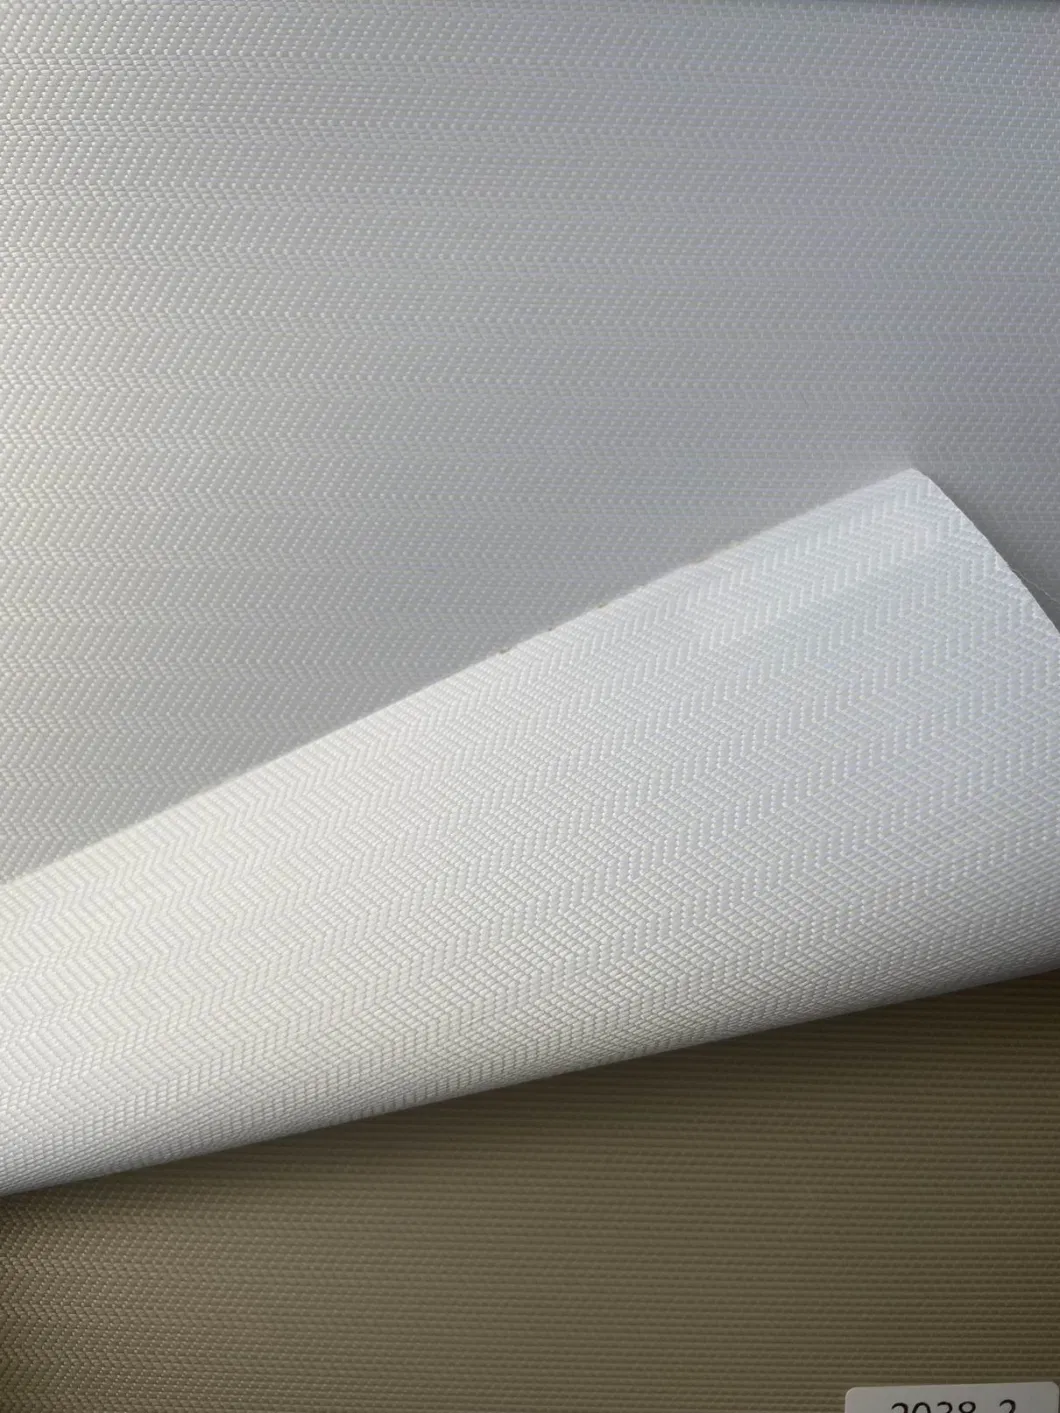 Transparent Big Width Roll up Shade, 100% Polyester Roller Day Night Blinds